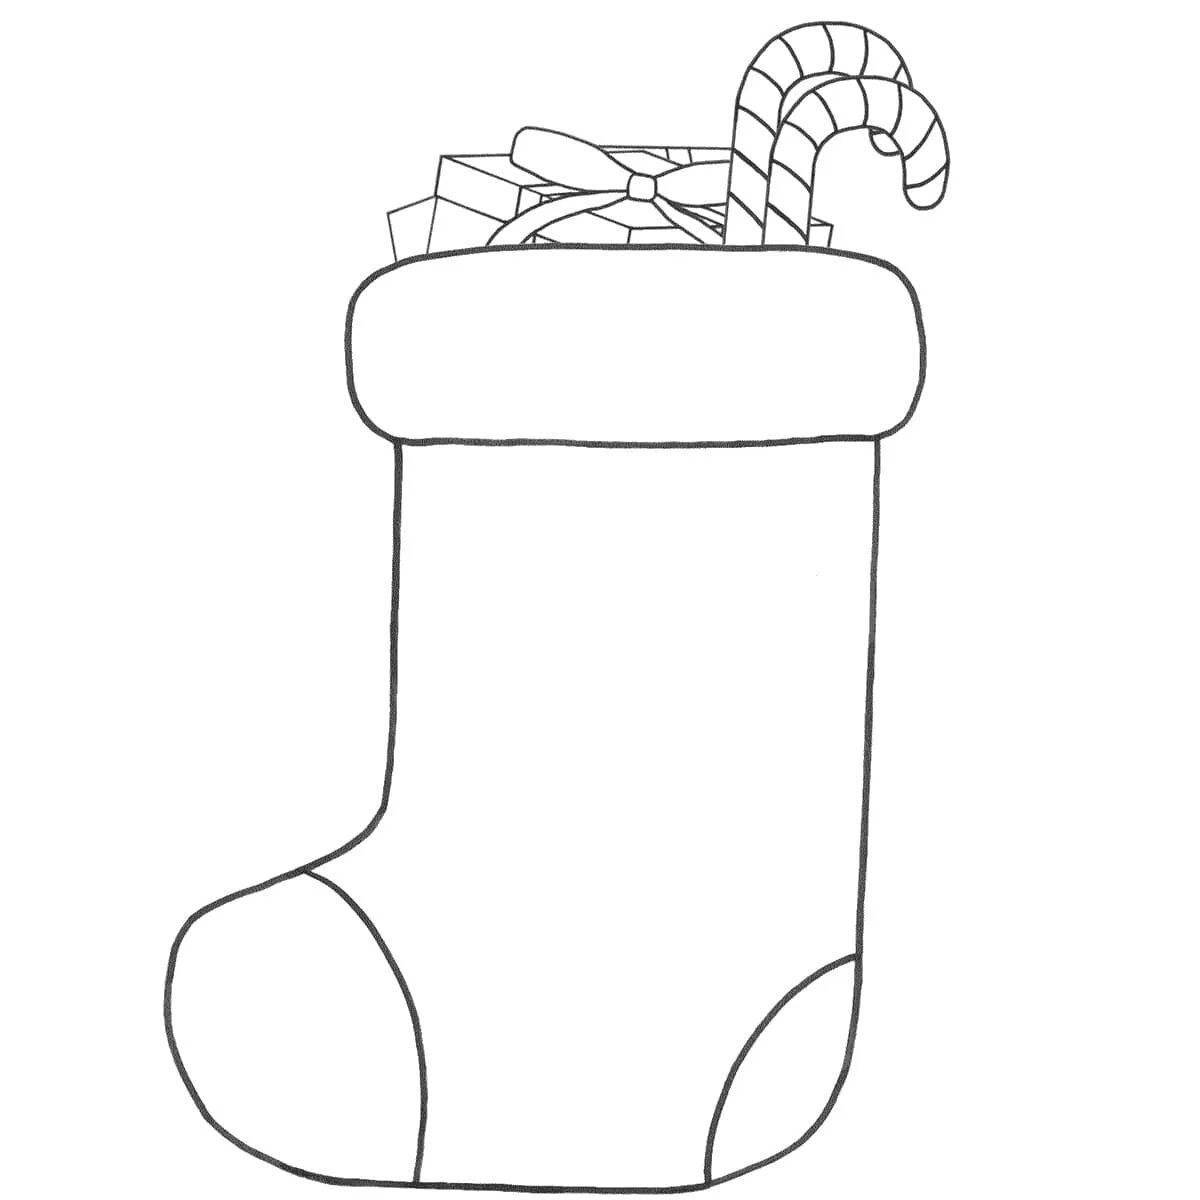 Coloring page brave boots